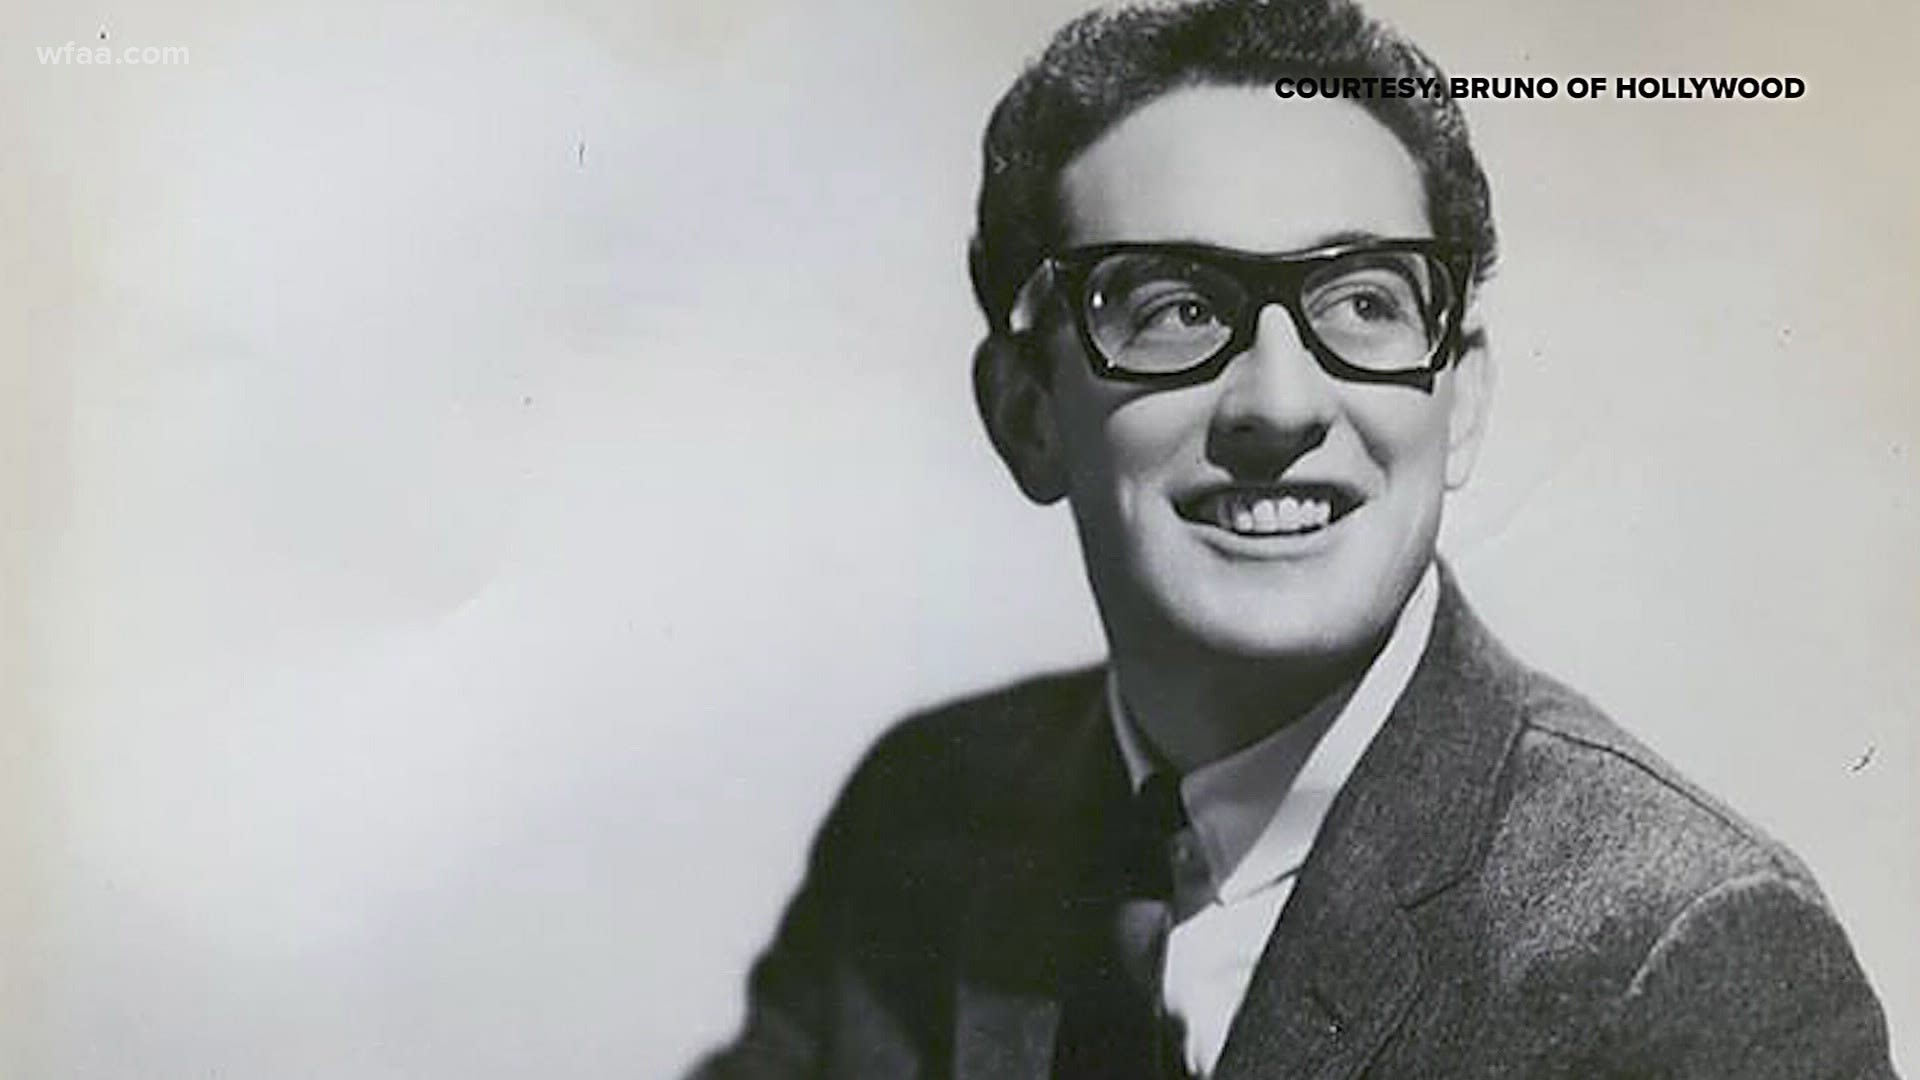 Academy texas native buddy holly changed rock n roll forever